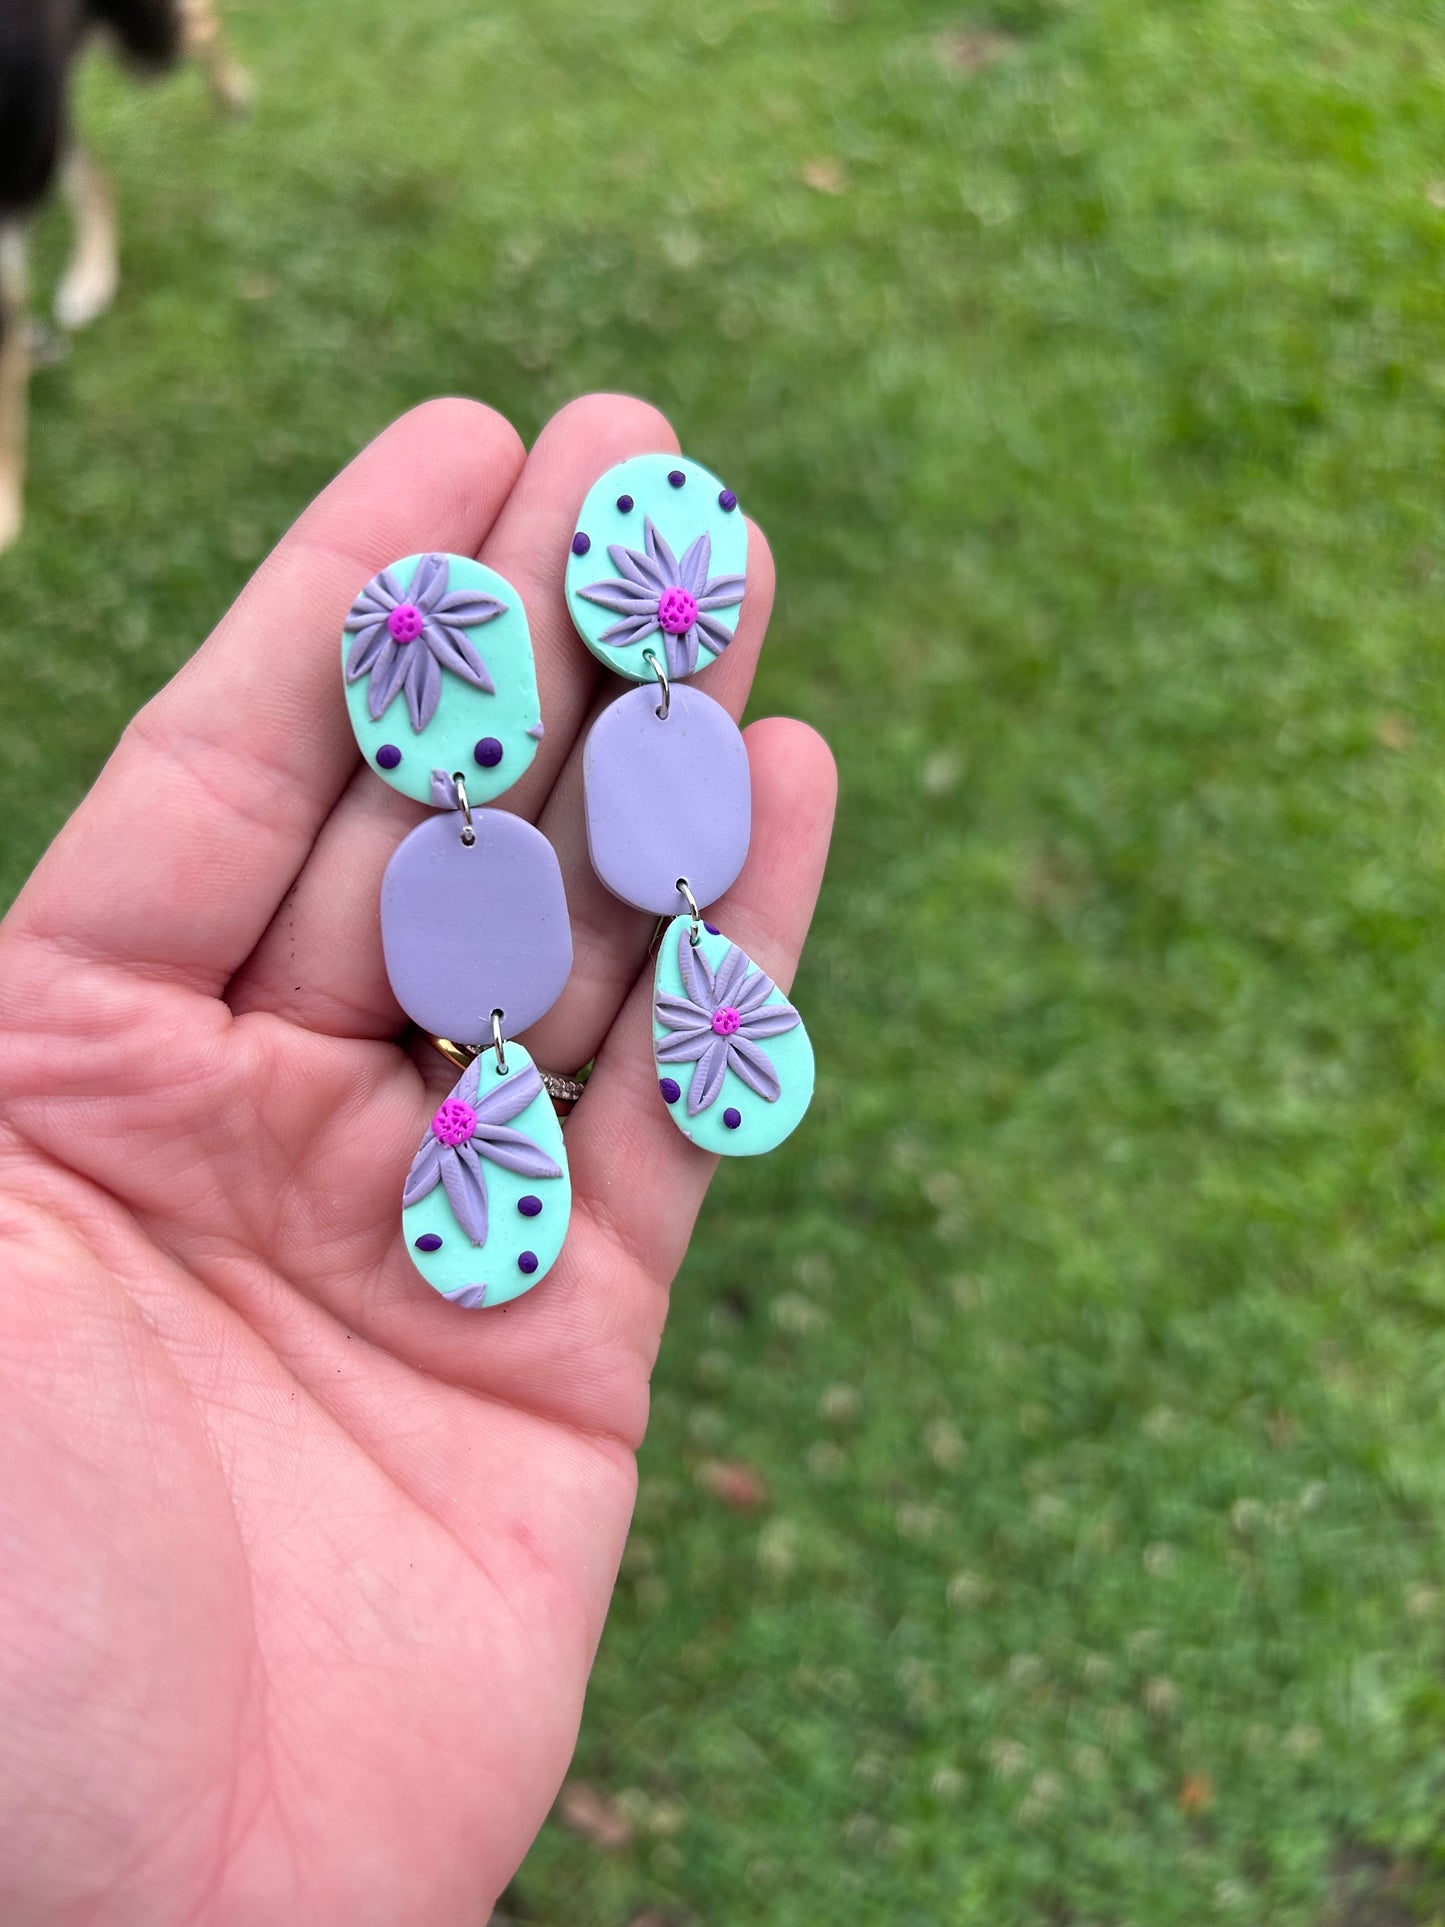 Clearance floral earrings